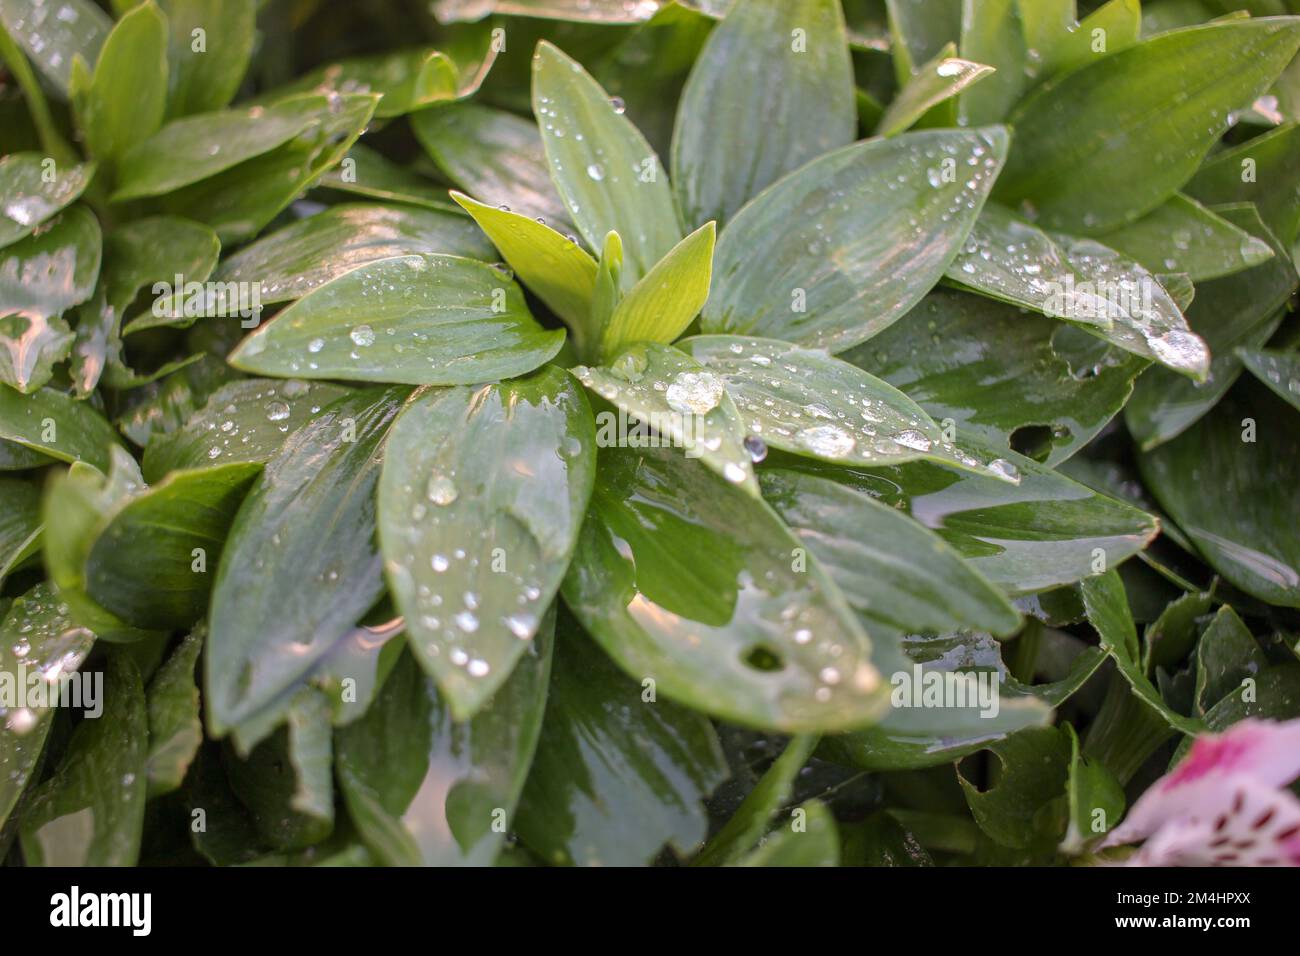 drops of rain on the leaves of a plant in my garden Stock Photo